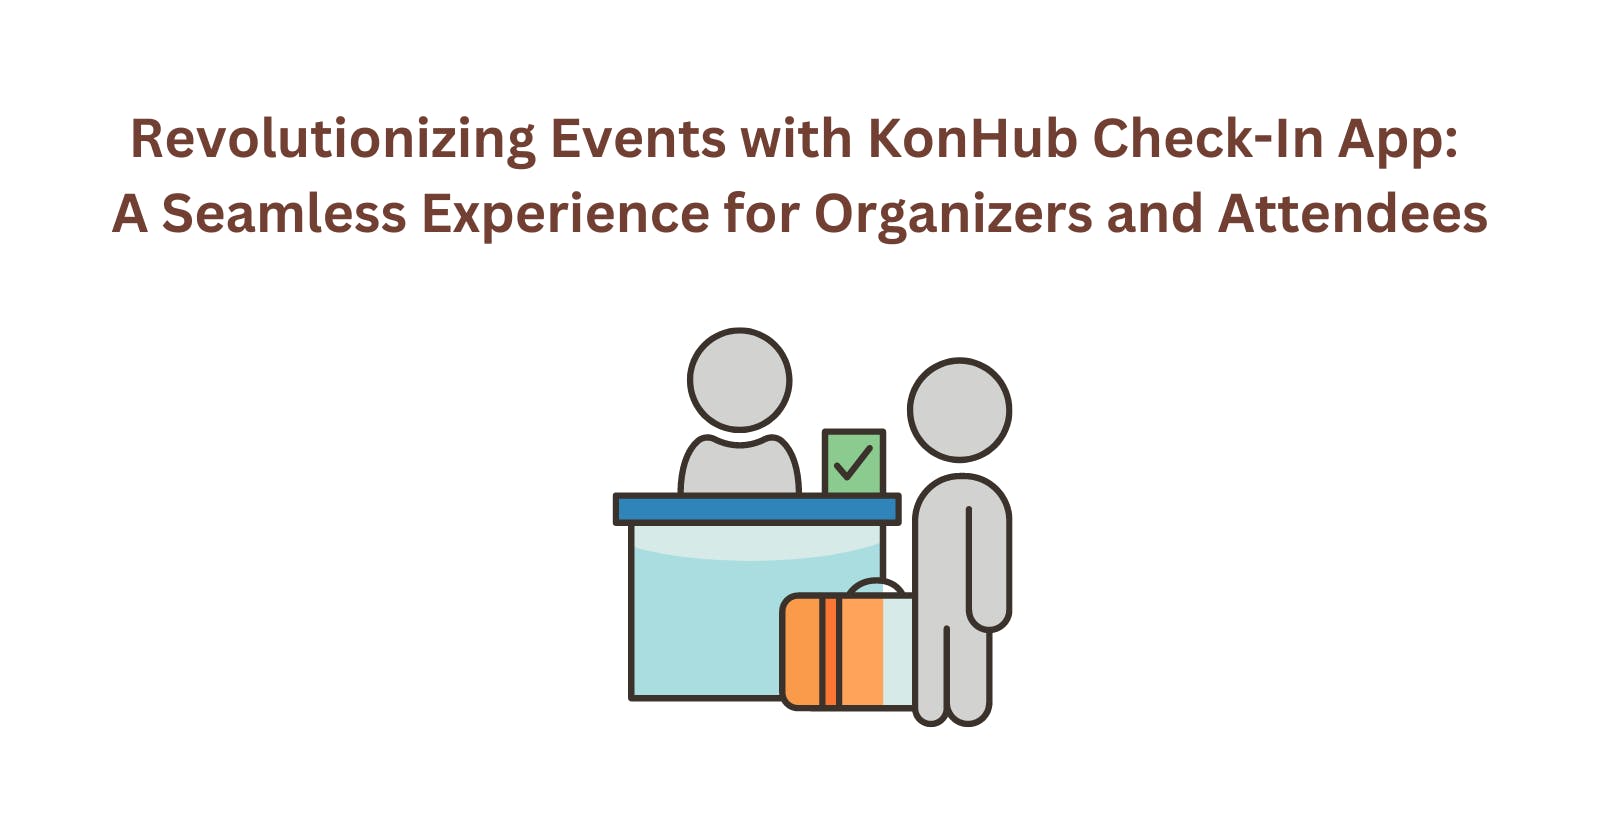 Revolutionizing Events with KonHub Check-In App: A Seamless Experience for Organizers and Attendees